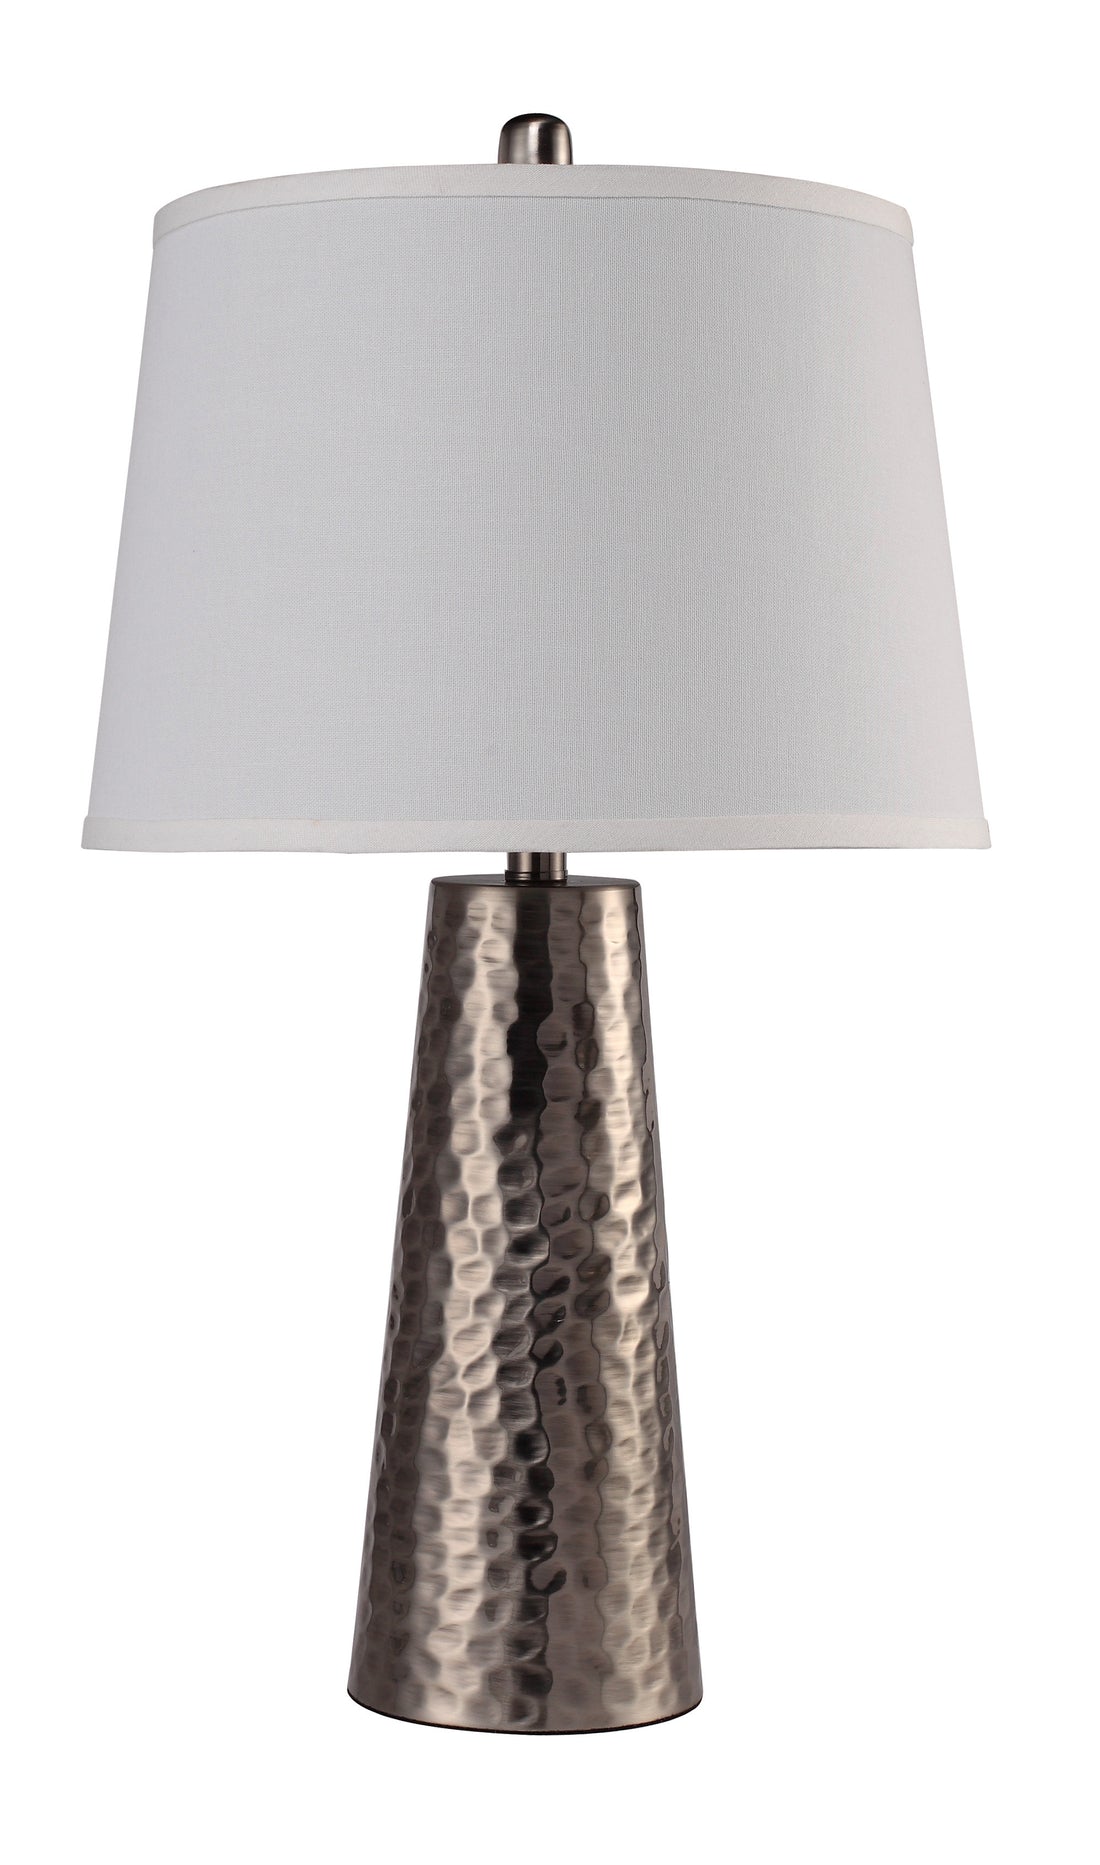 25"h Silver leaf Hammered Table Lamp 1pc Ctn 2.15